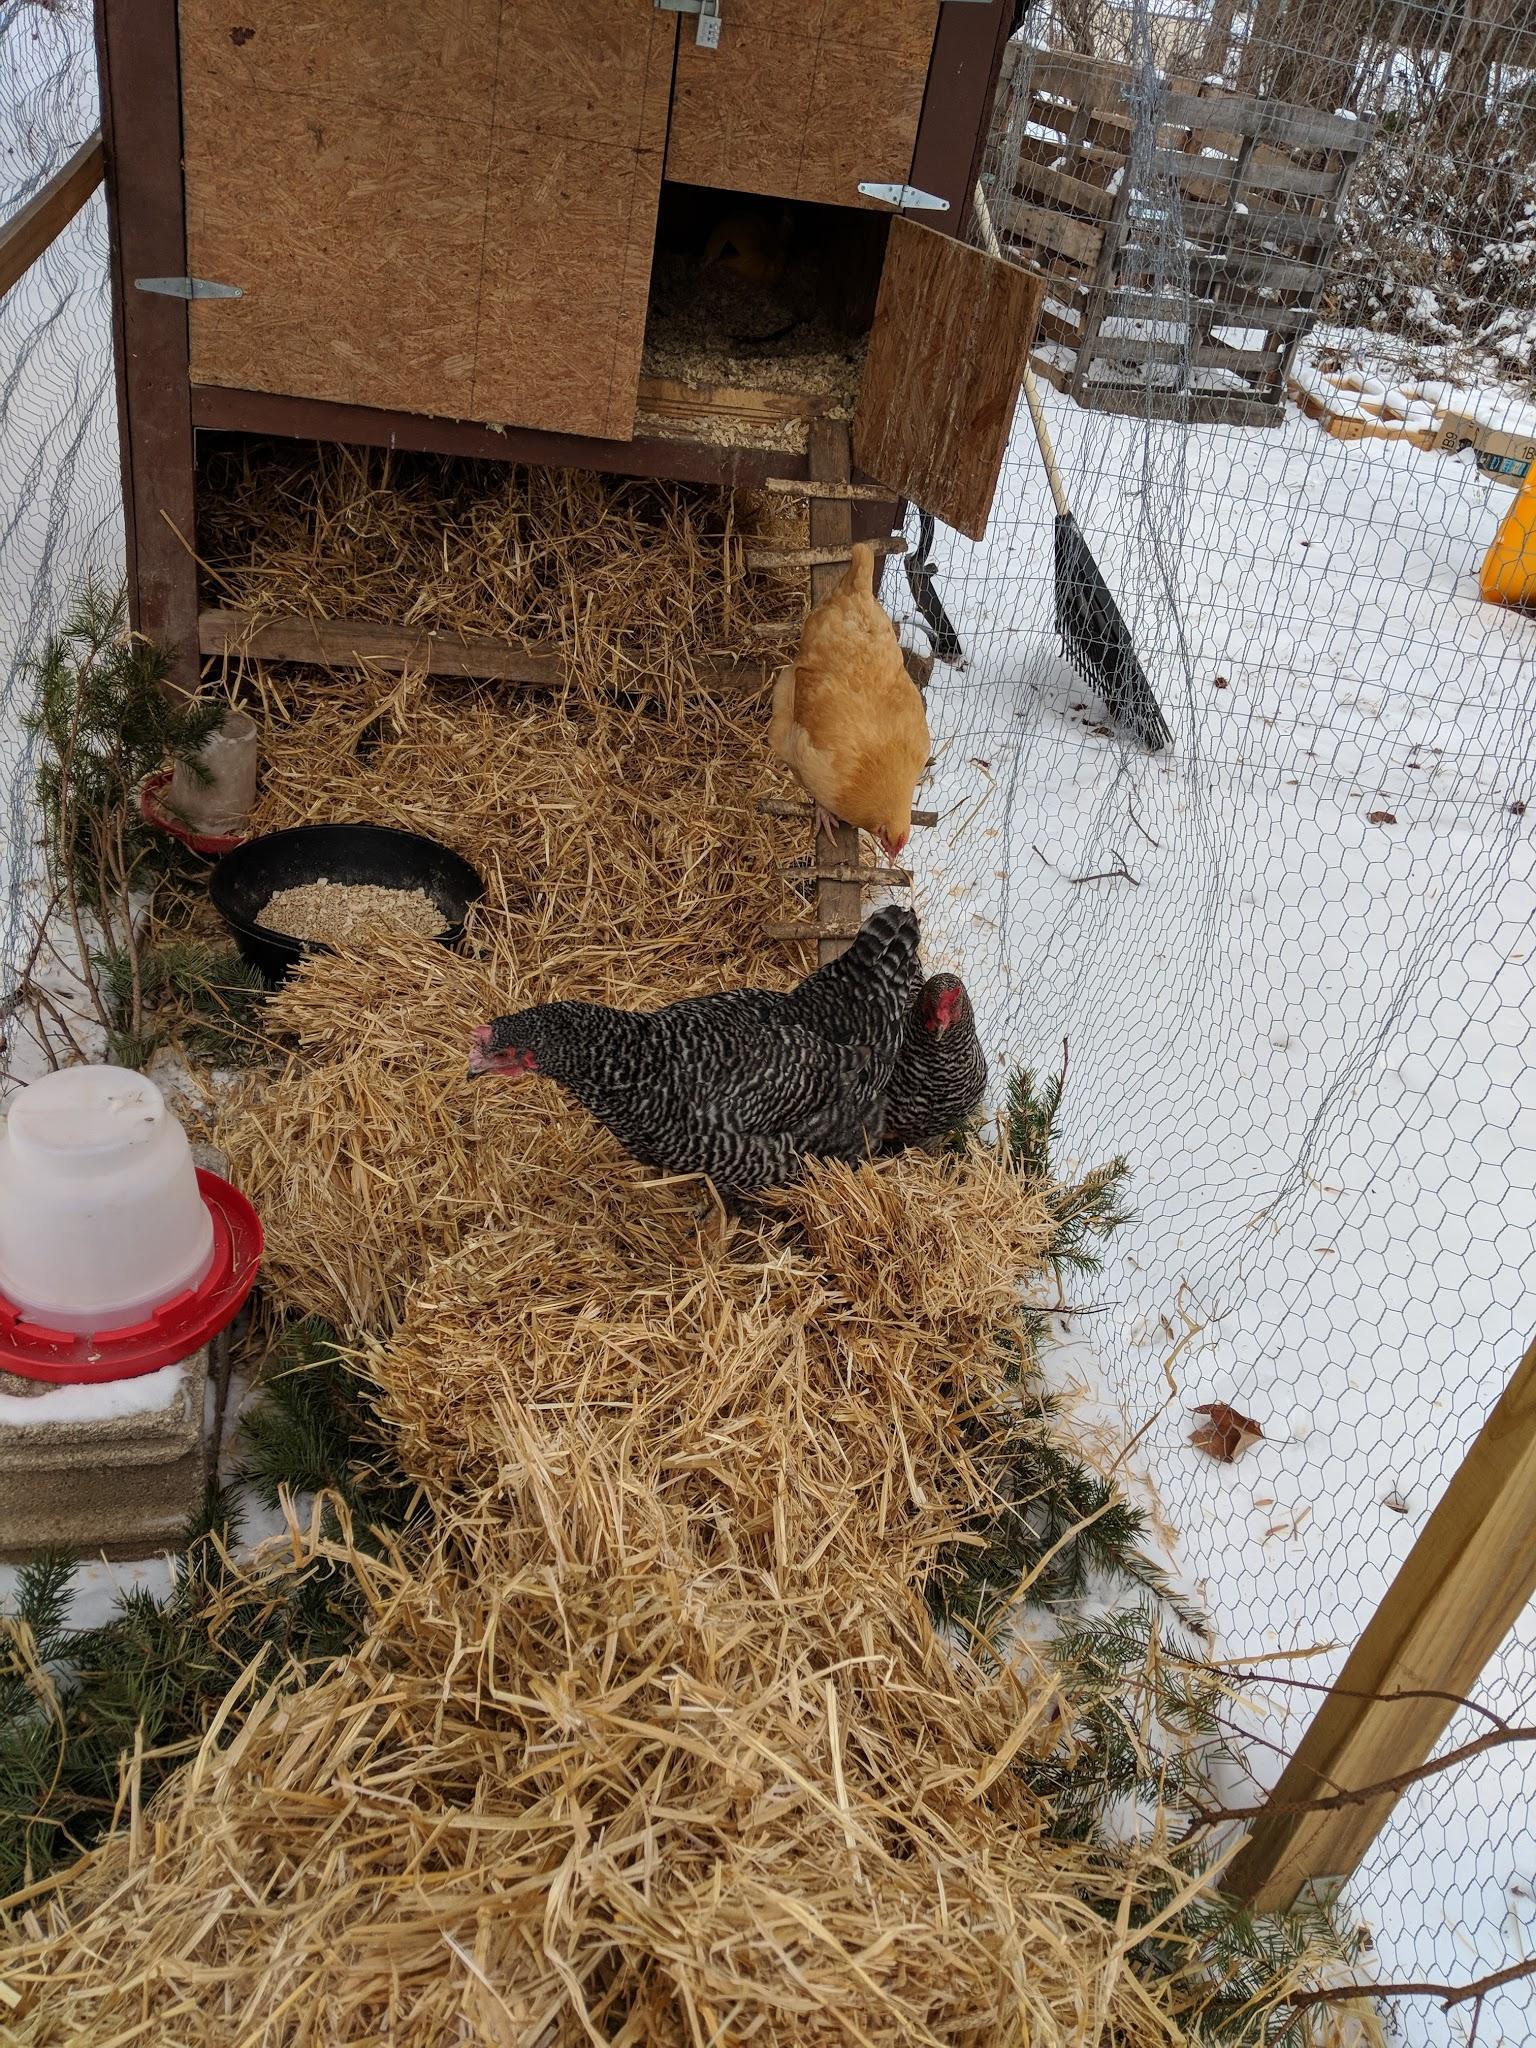 Chickens playing in straw in the winter